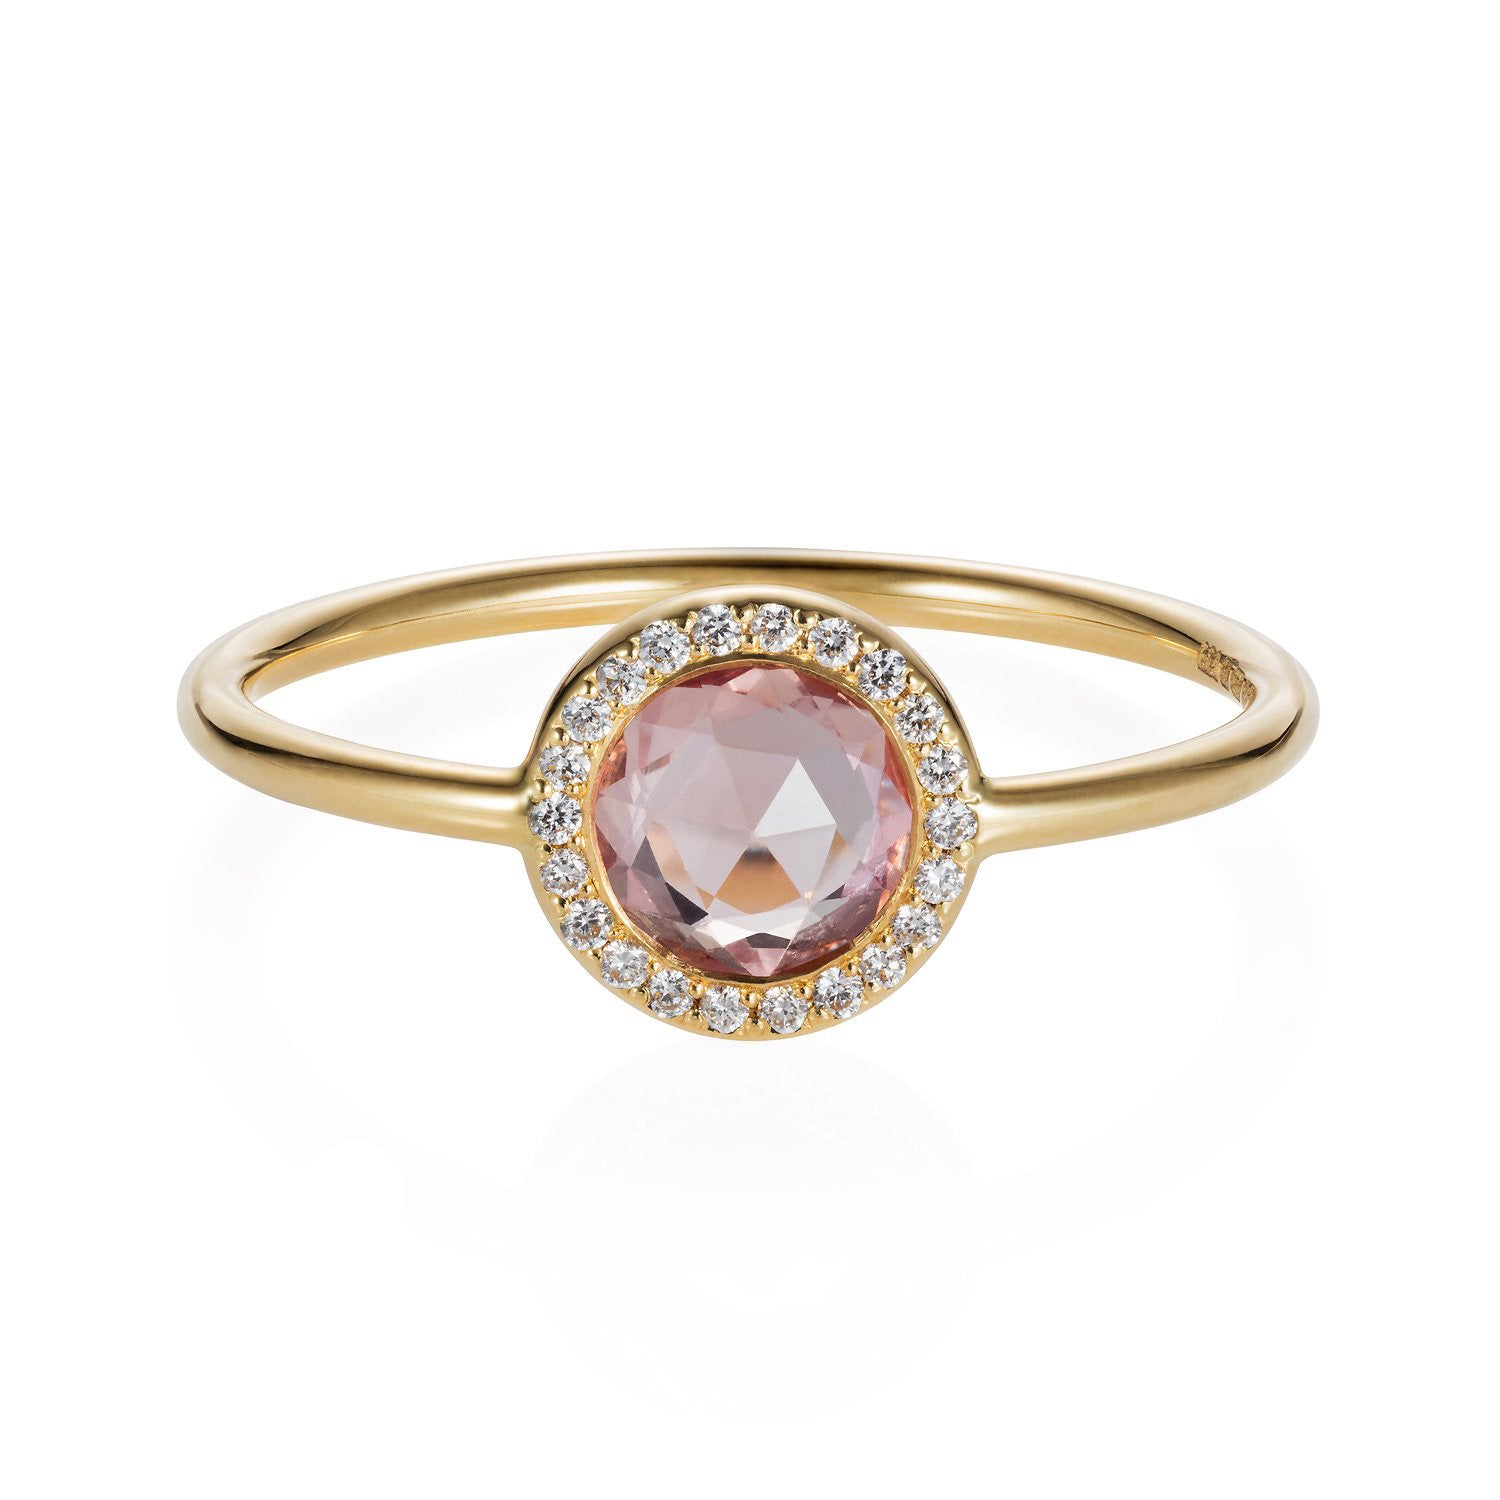 18ct yellow gold ring set with a round pink rosecut sapphire surrounded by a fine white diamond halo